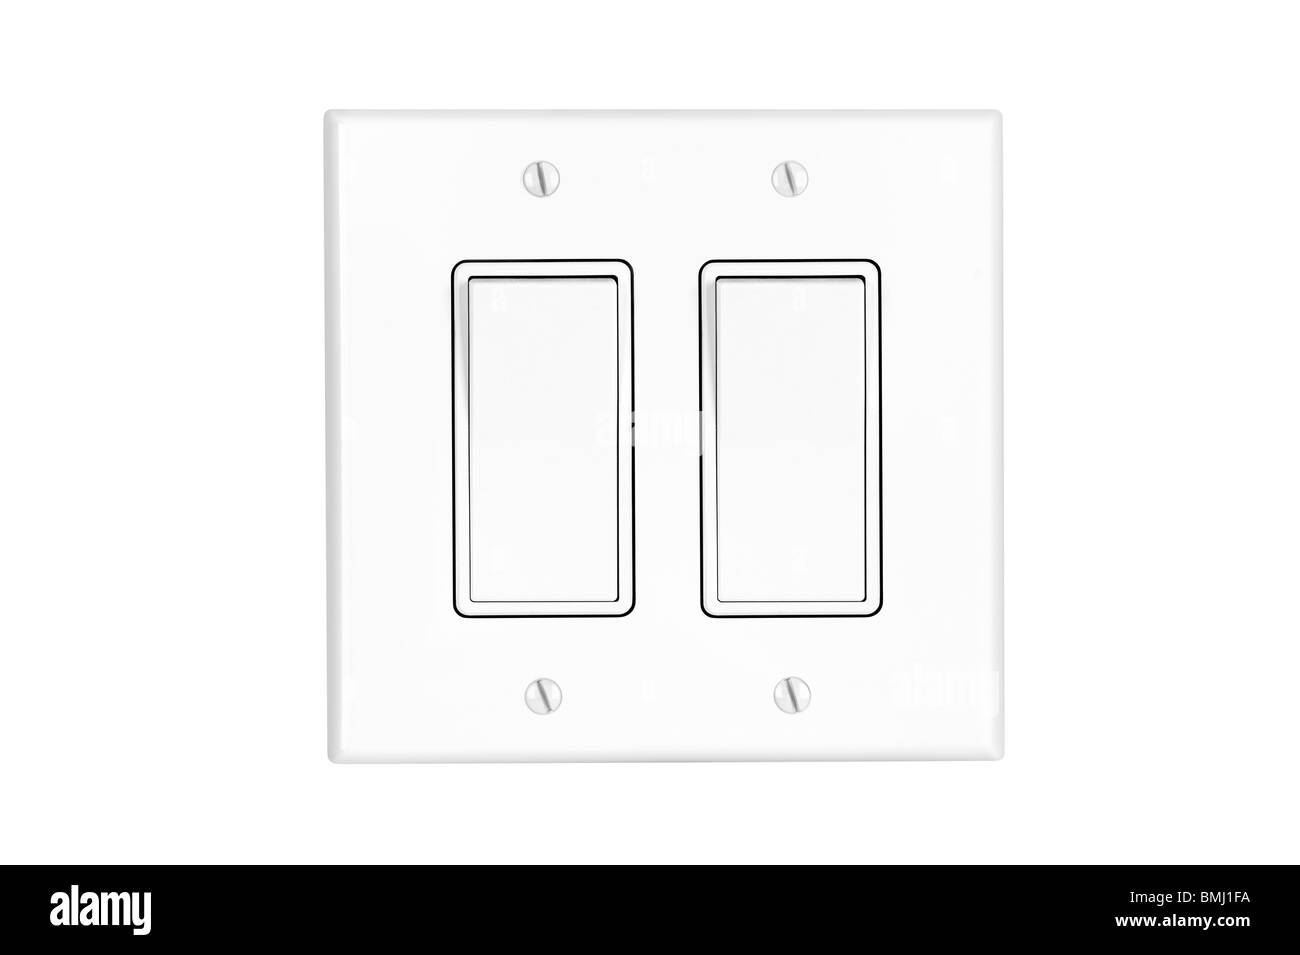 A modern white dual toggle electrical light switch isolated on white. Stock Photo